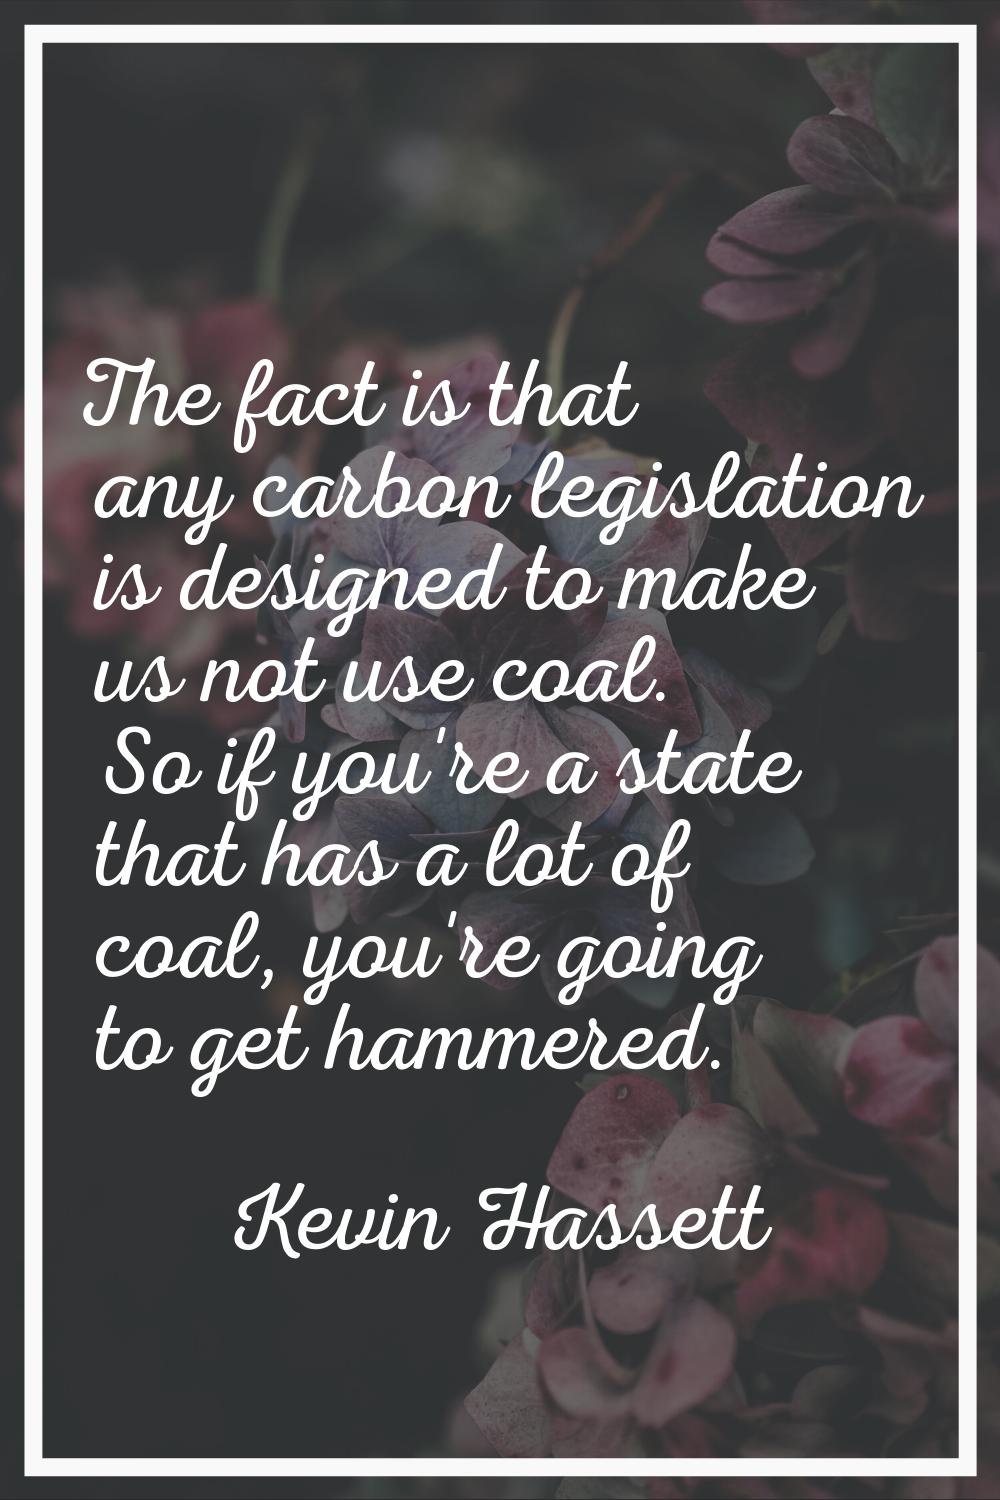 The fact is that any carbon legislation is designed to make us not use coal. So if you're a state t